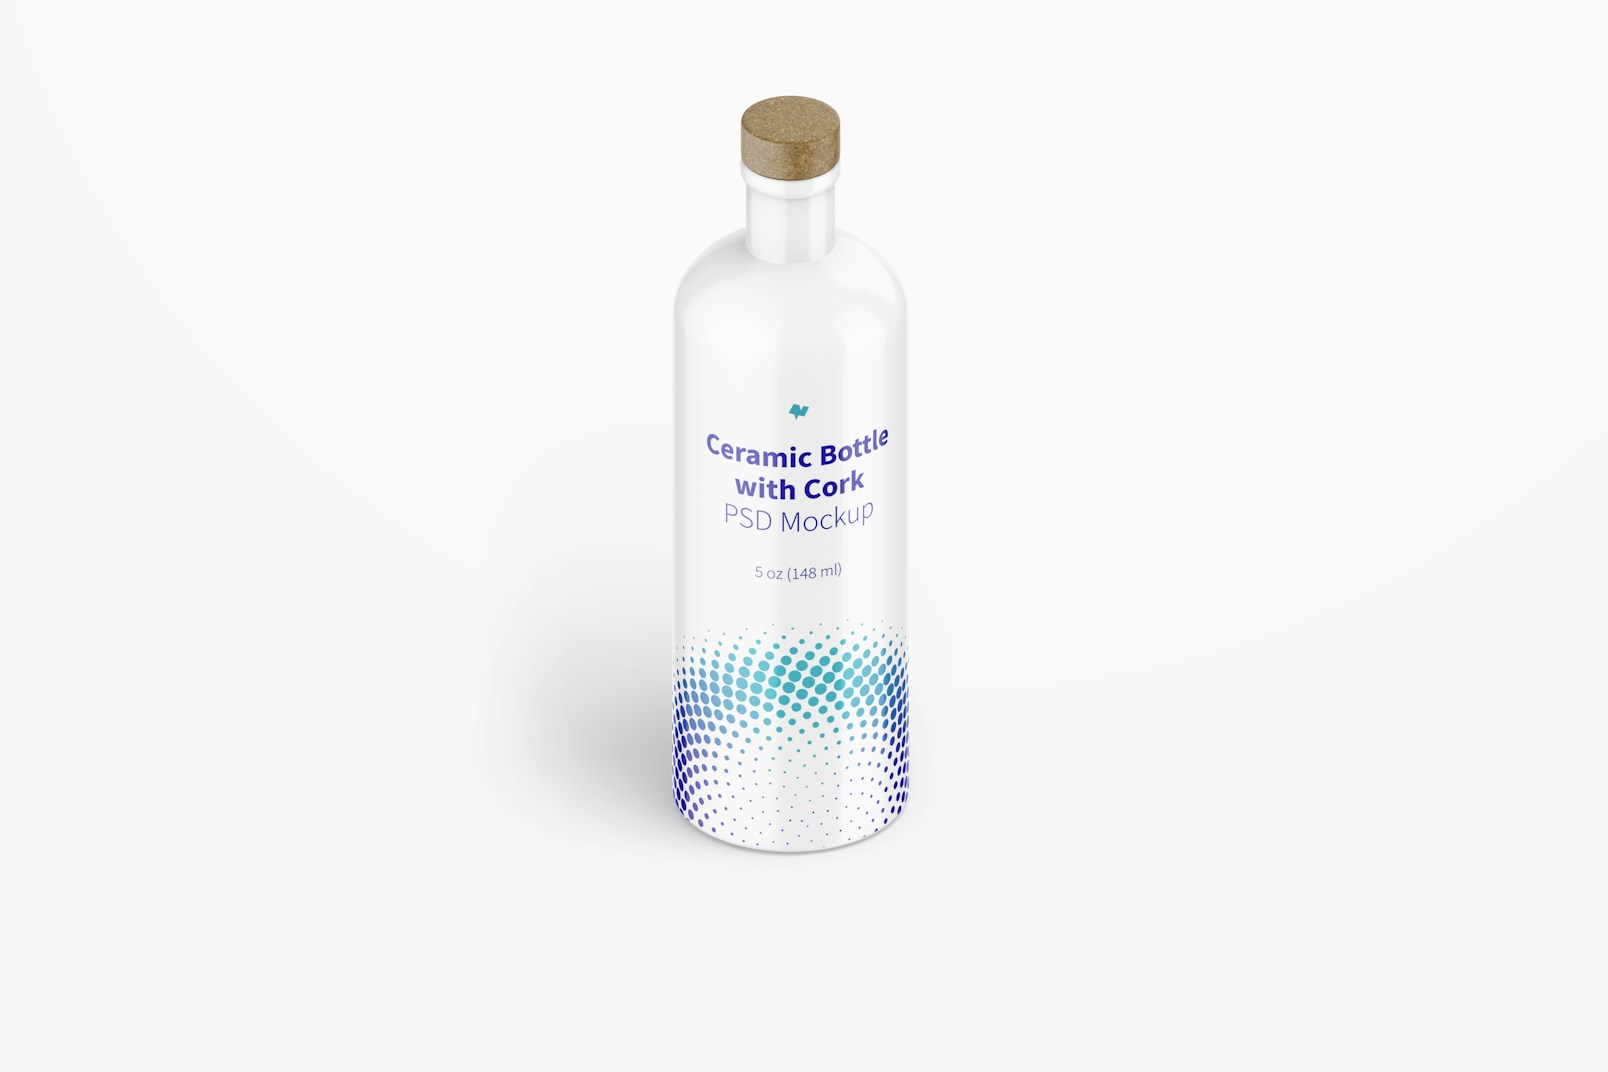 Ceramic Bottle with Cork Mockup, Isometric View